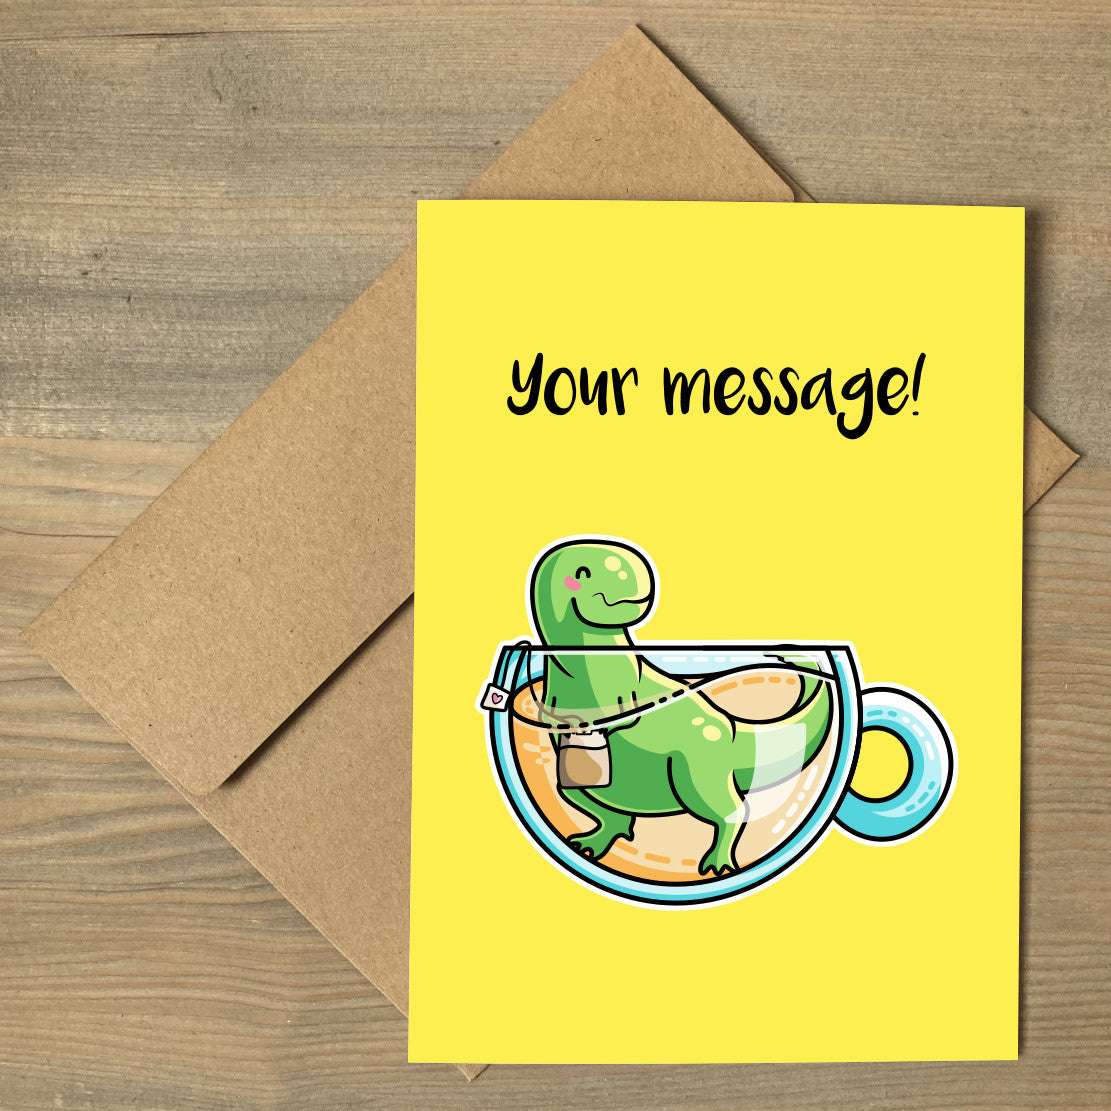 A yellow greeting card lying flat on a brown envelope, with a design of a cute green tyrannosaurus rex dinosaur holding a teabag in a glass teacup of yellow liquid with a personalised message above